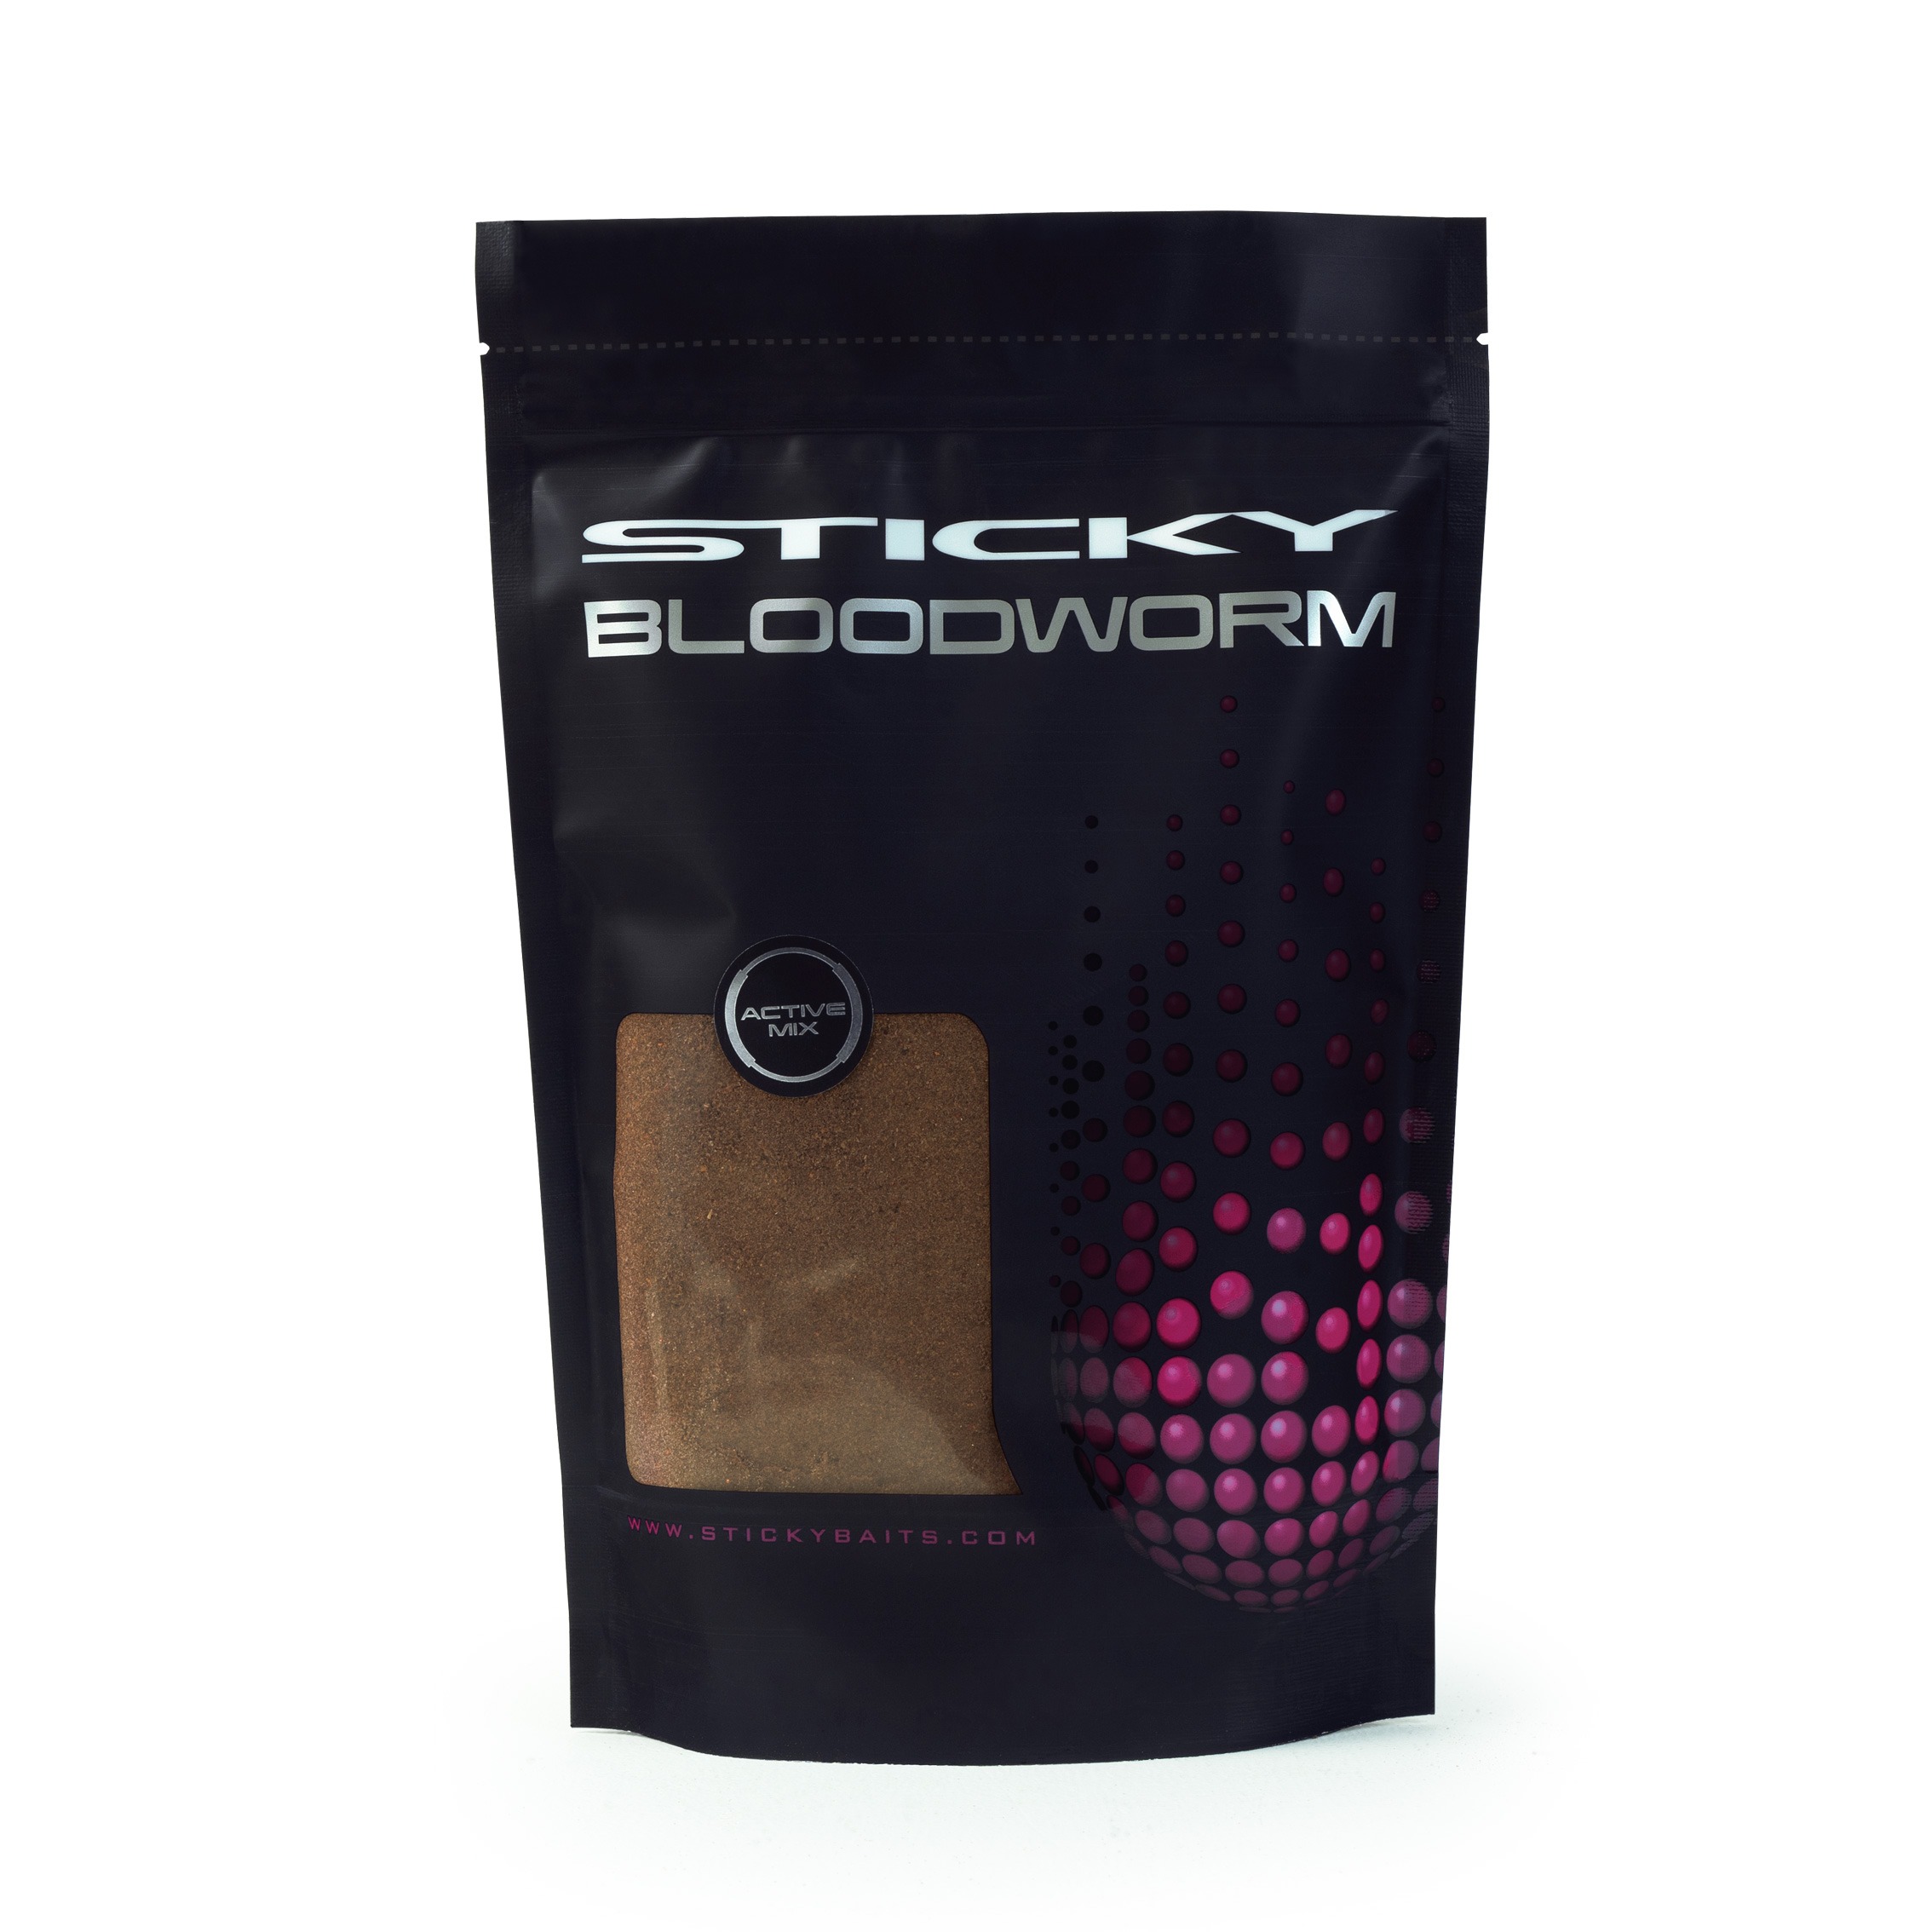 Sticky Baits - Products - Bloodworm Active Mix - Carp Fishing Bait